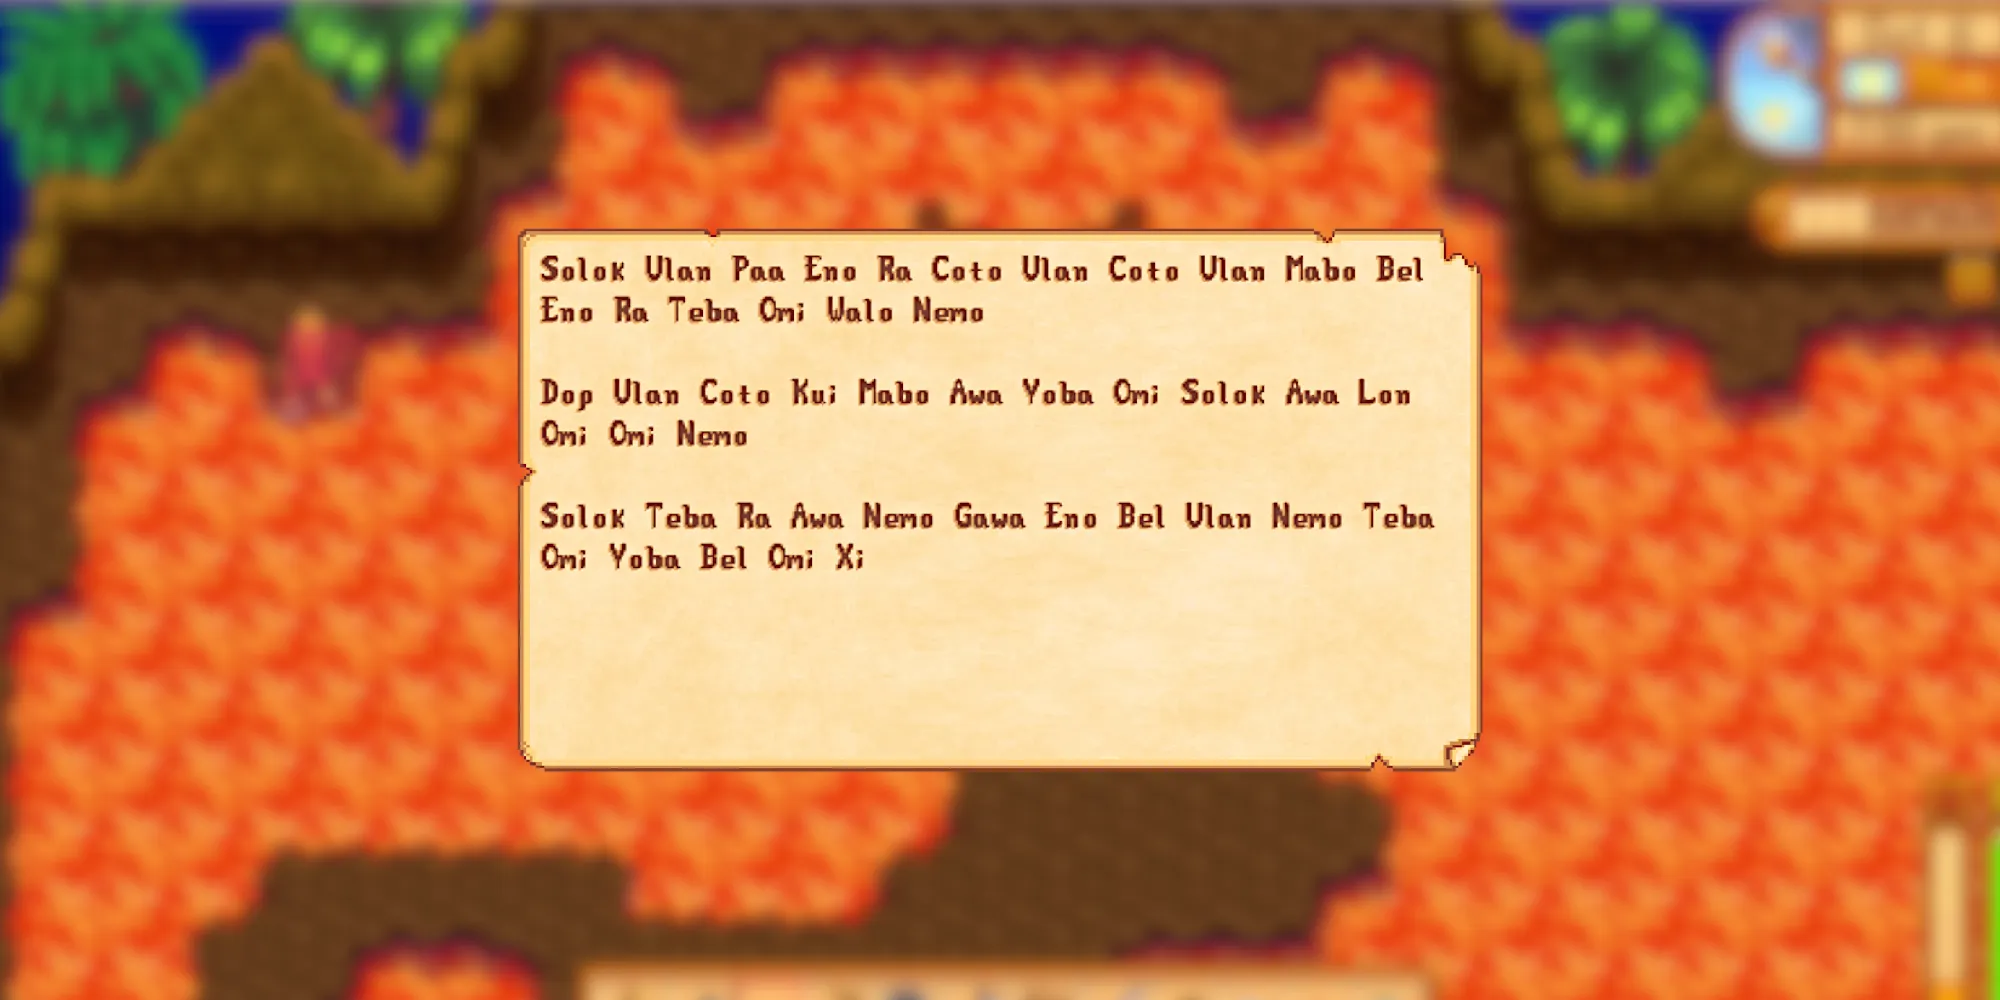 Image of the lost book note used to find some Secret Furniture in Stardew Valley